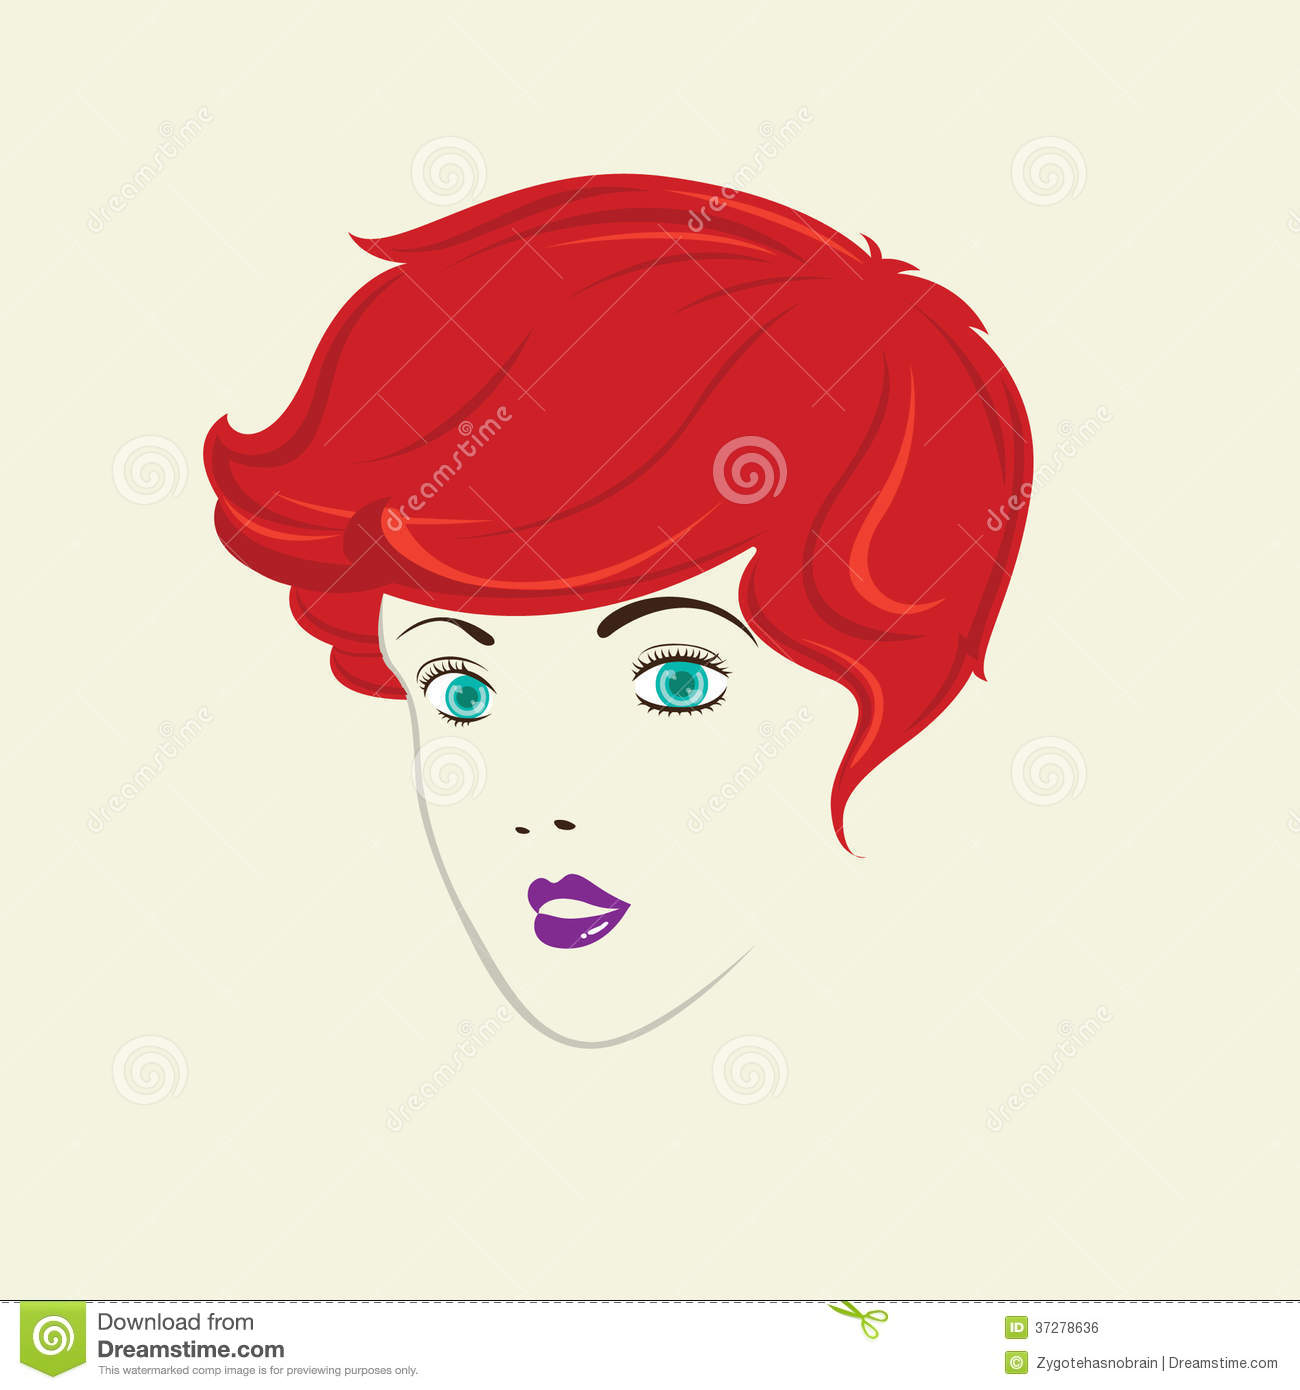 Short Curly Hair Woman Hairstyle  Royalty Free Stock Image   Image